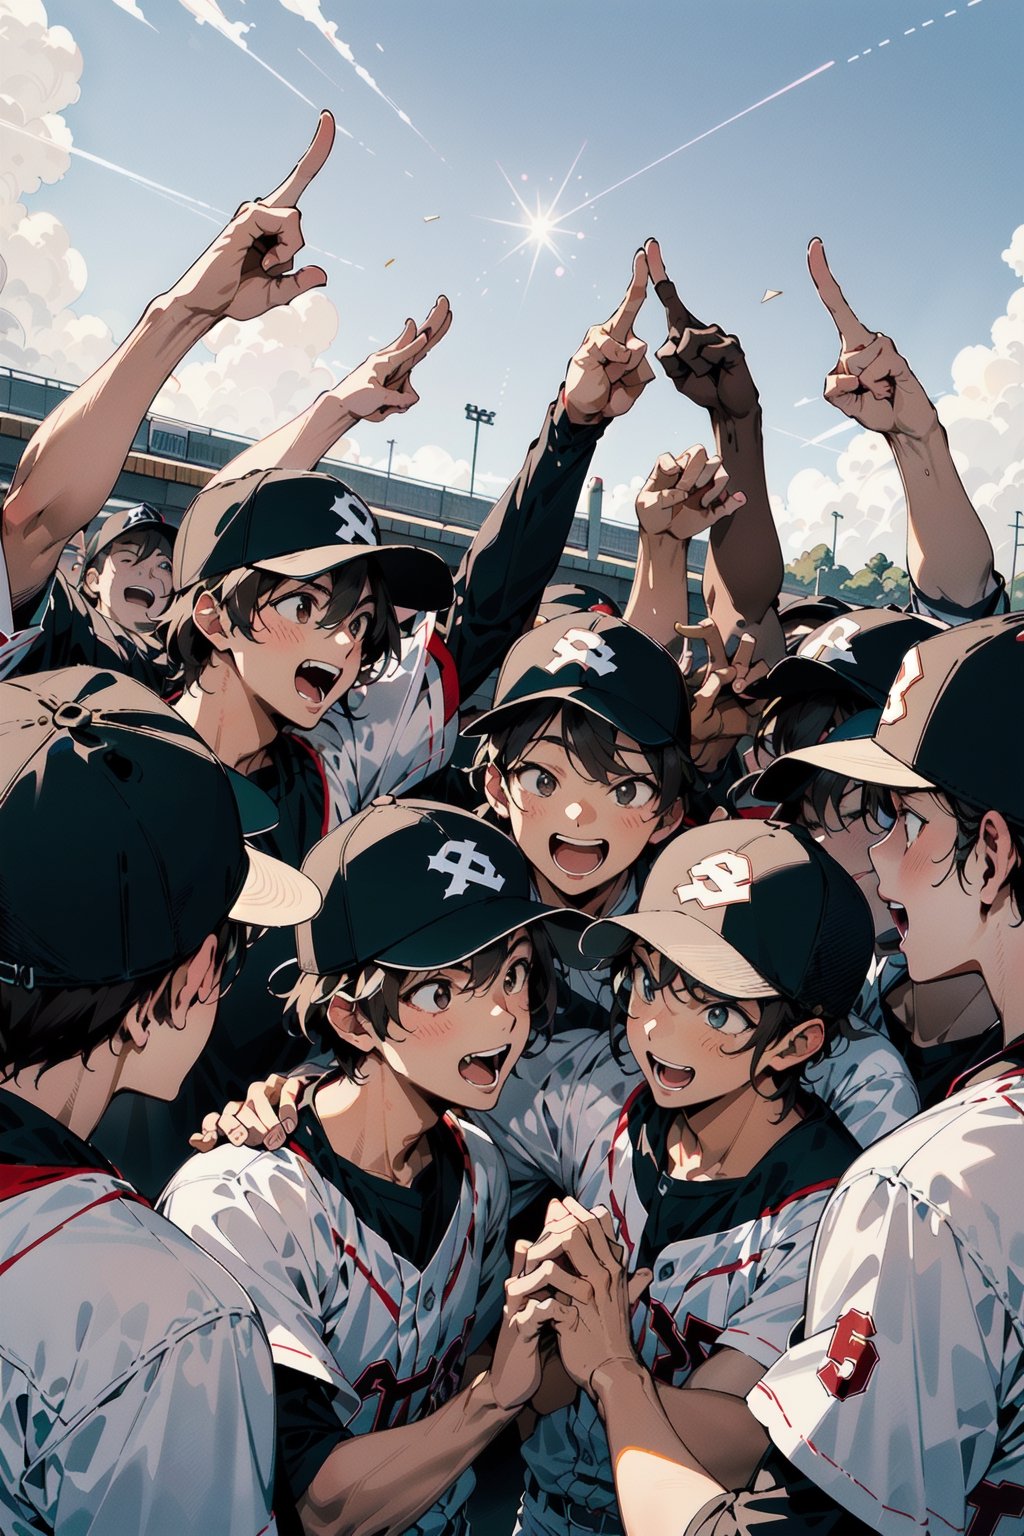 (Japanese high school baseball),(pitcher's mound),(15 high school boys in uniform gathered and crowded together),(circle of joy),(all the characters are excitedly extending their index fingers to the sky)